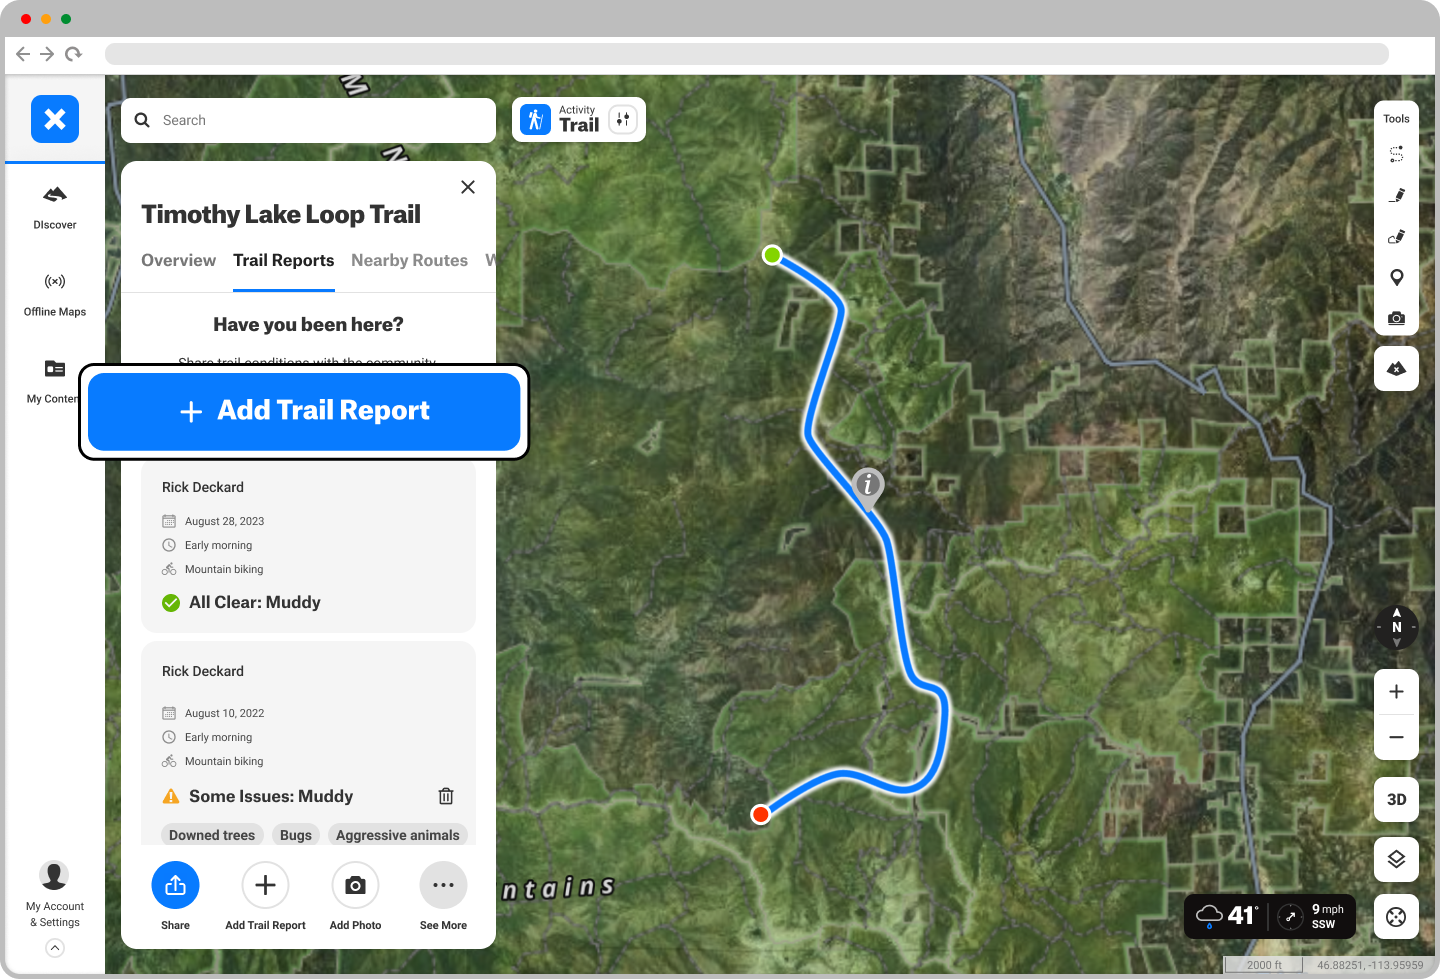 Add Trail Report Trail Reports Tab Hiking Trail Map Query Backcountry Web.png